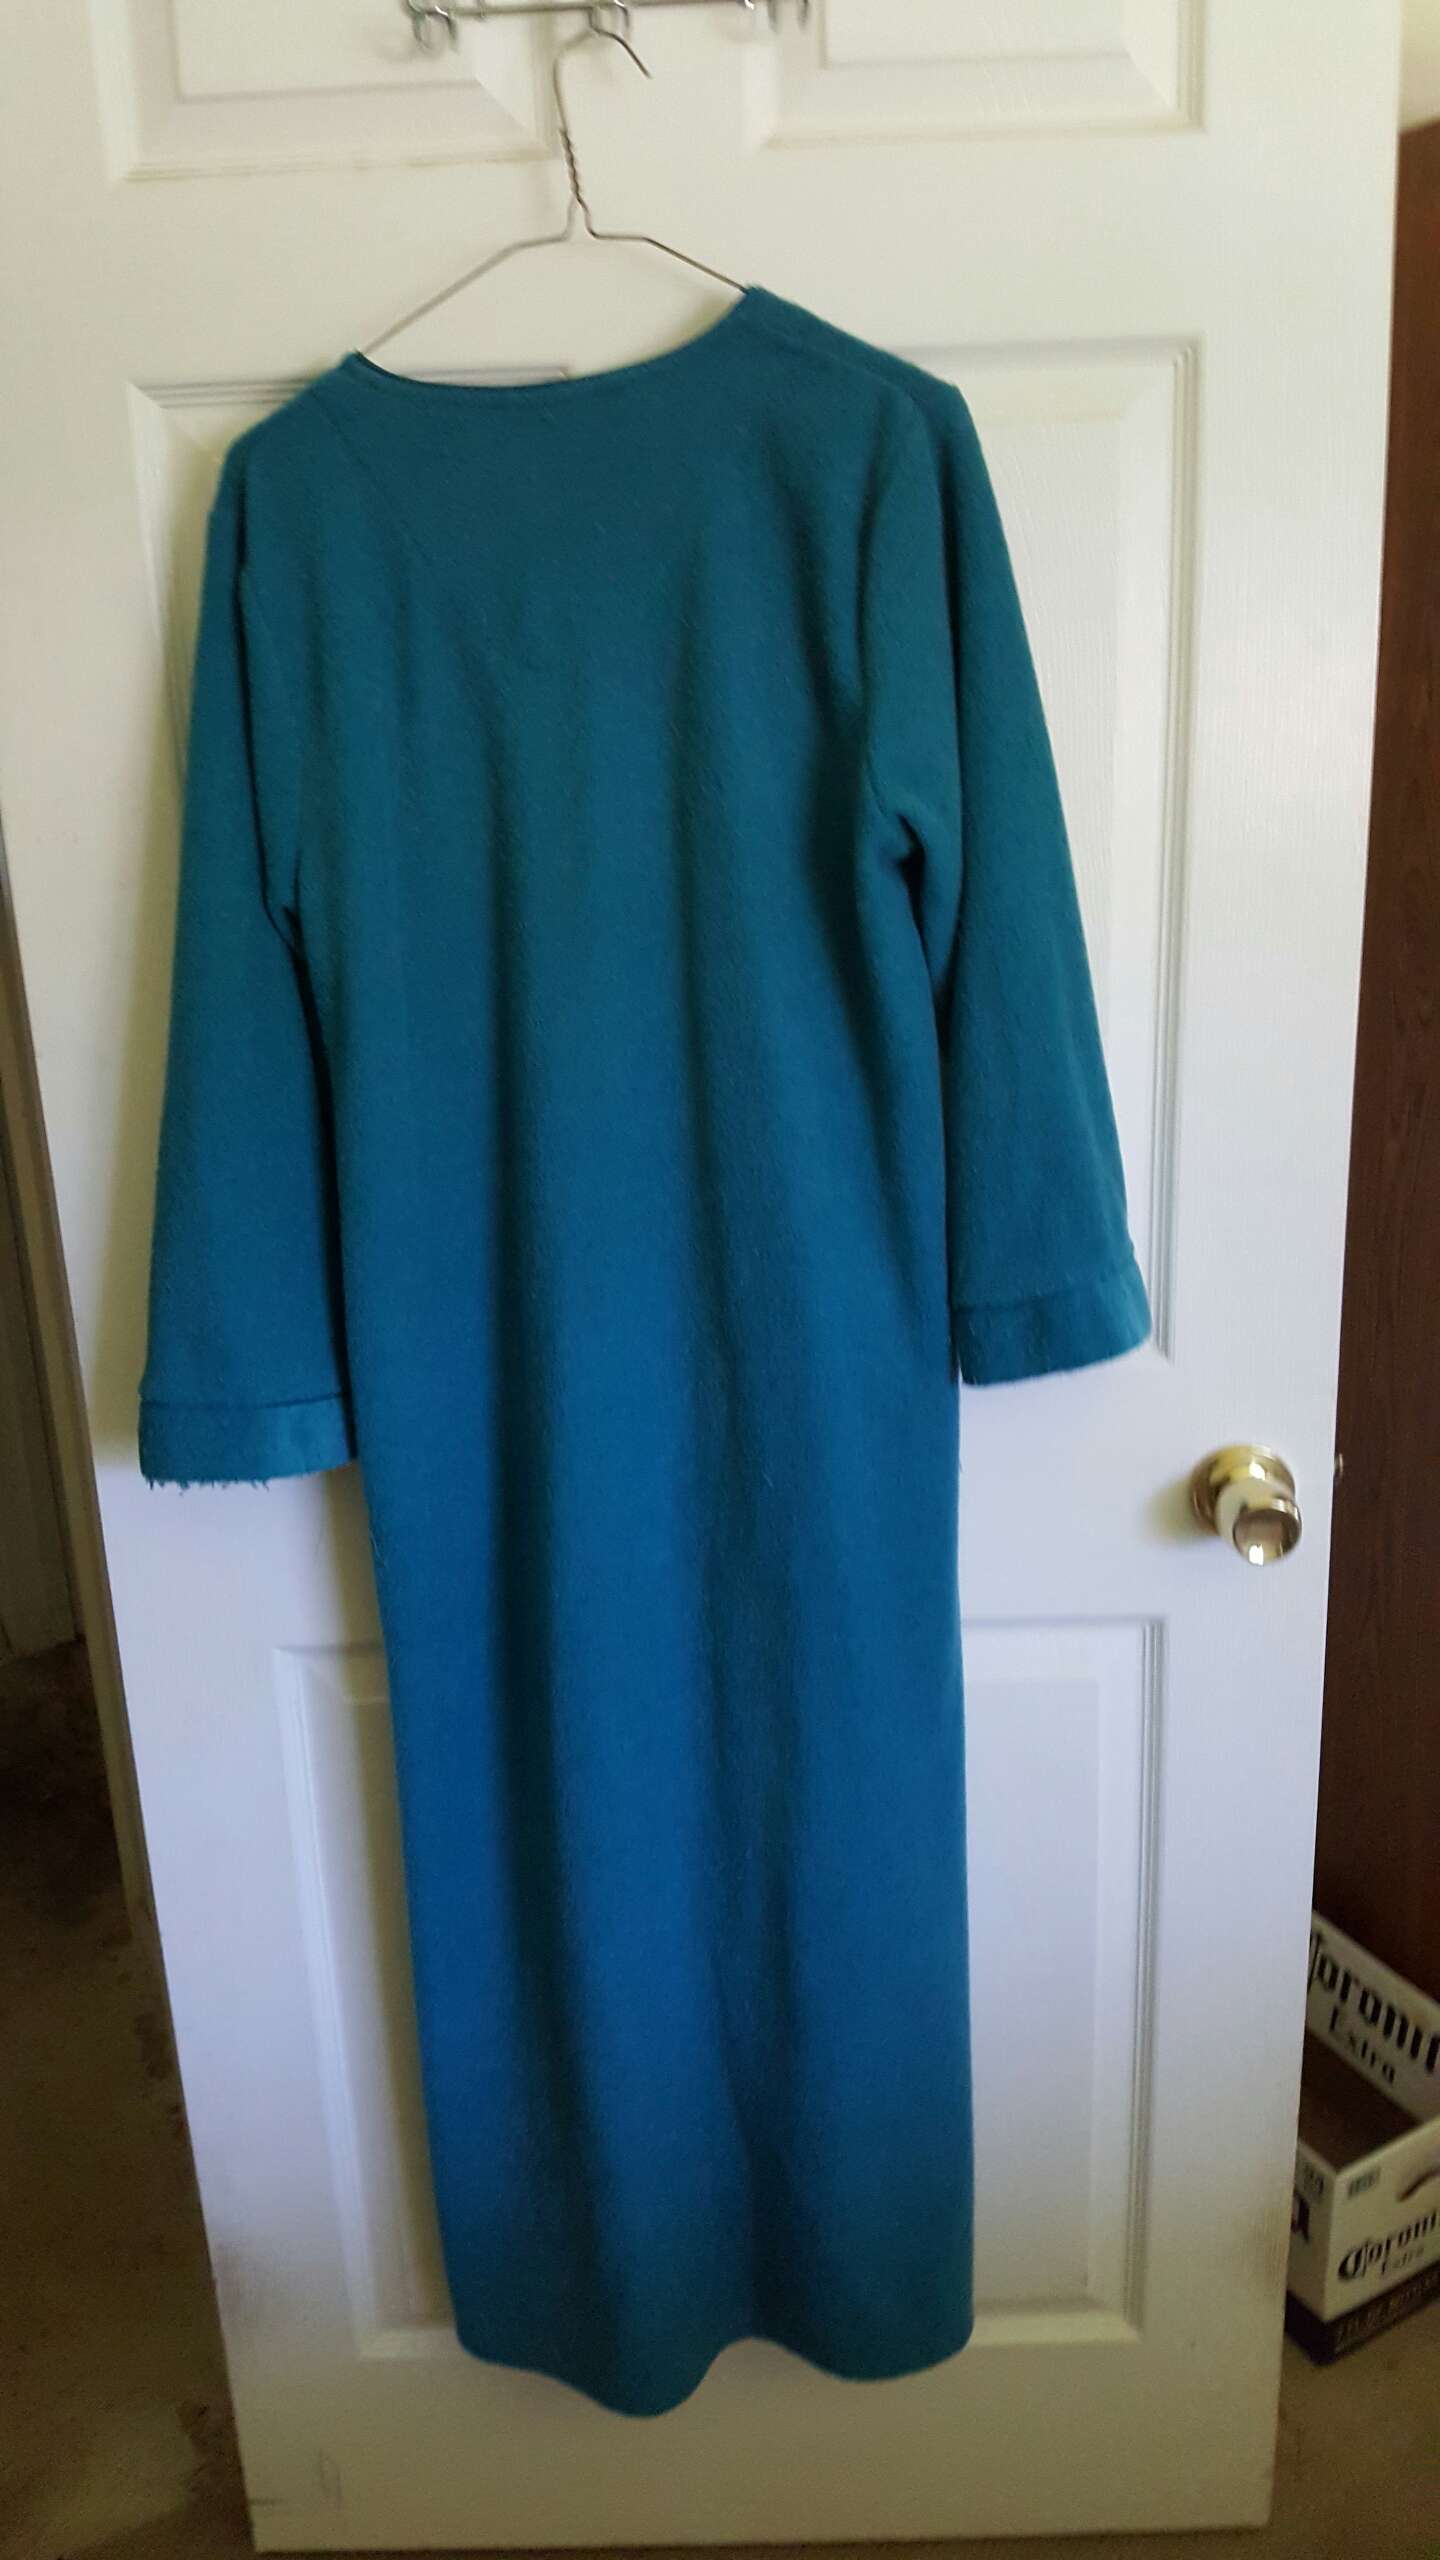 Anthony Richards Womens Winter Robe for sale in Taylor, TX - 5miles ...